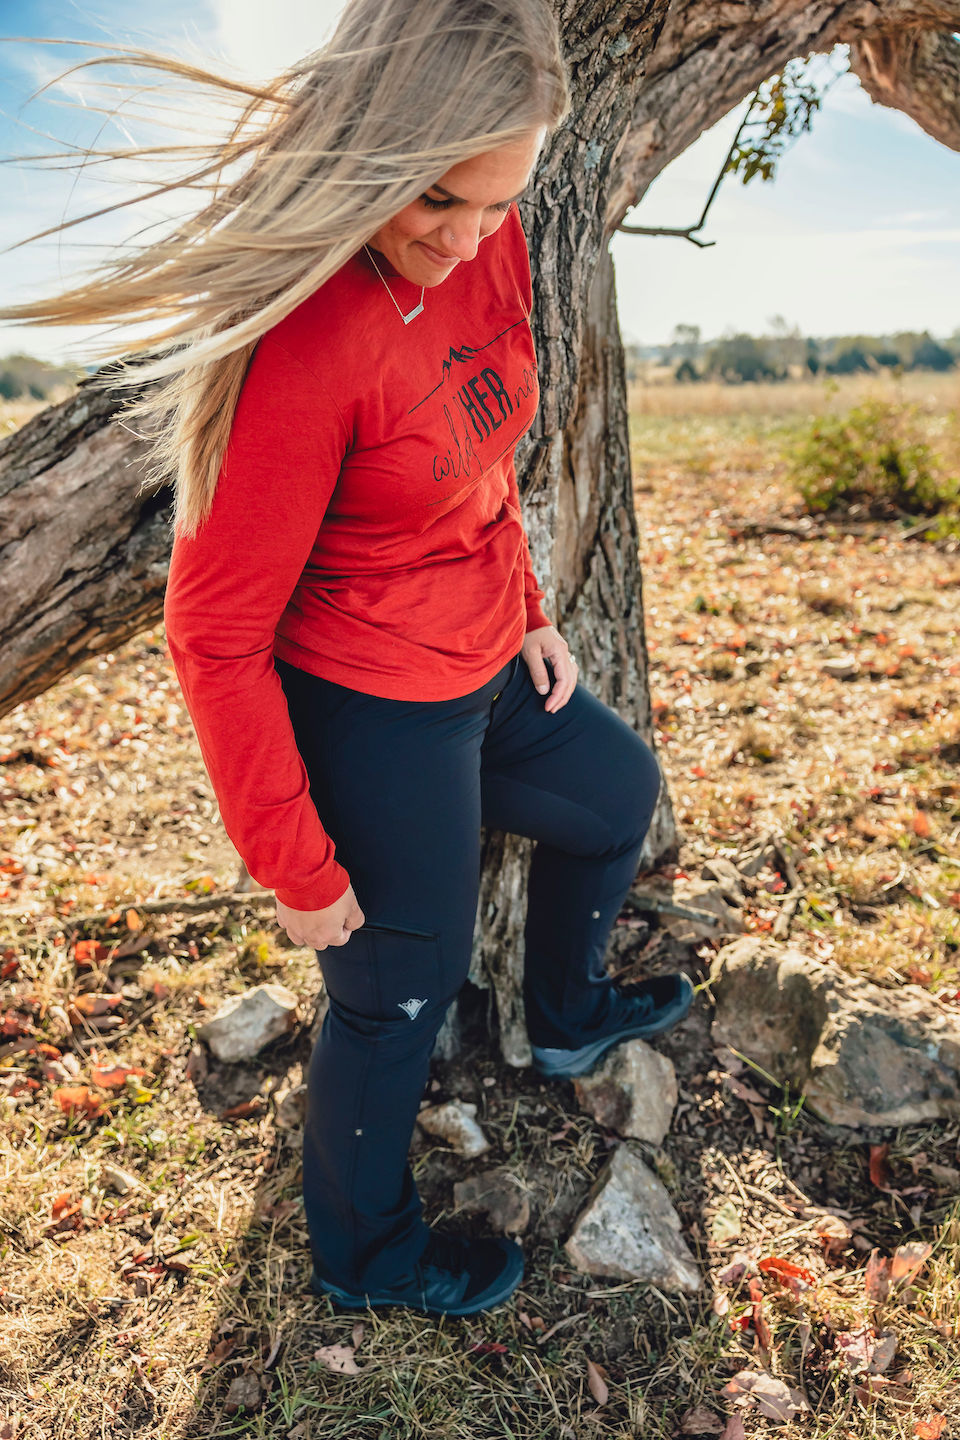 SheFly Apparel: Revolutionizing How Women Answer Nature's Call